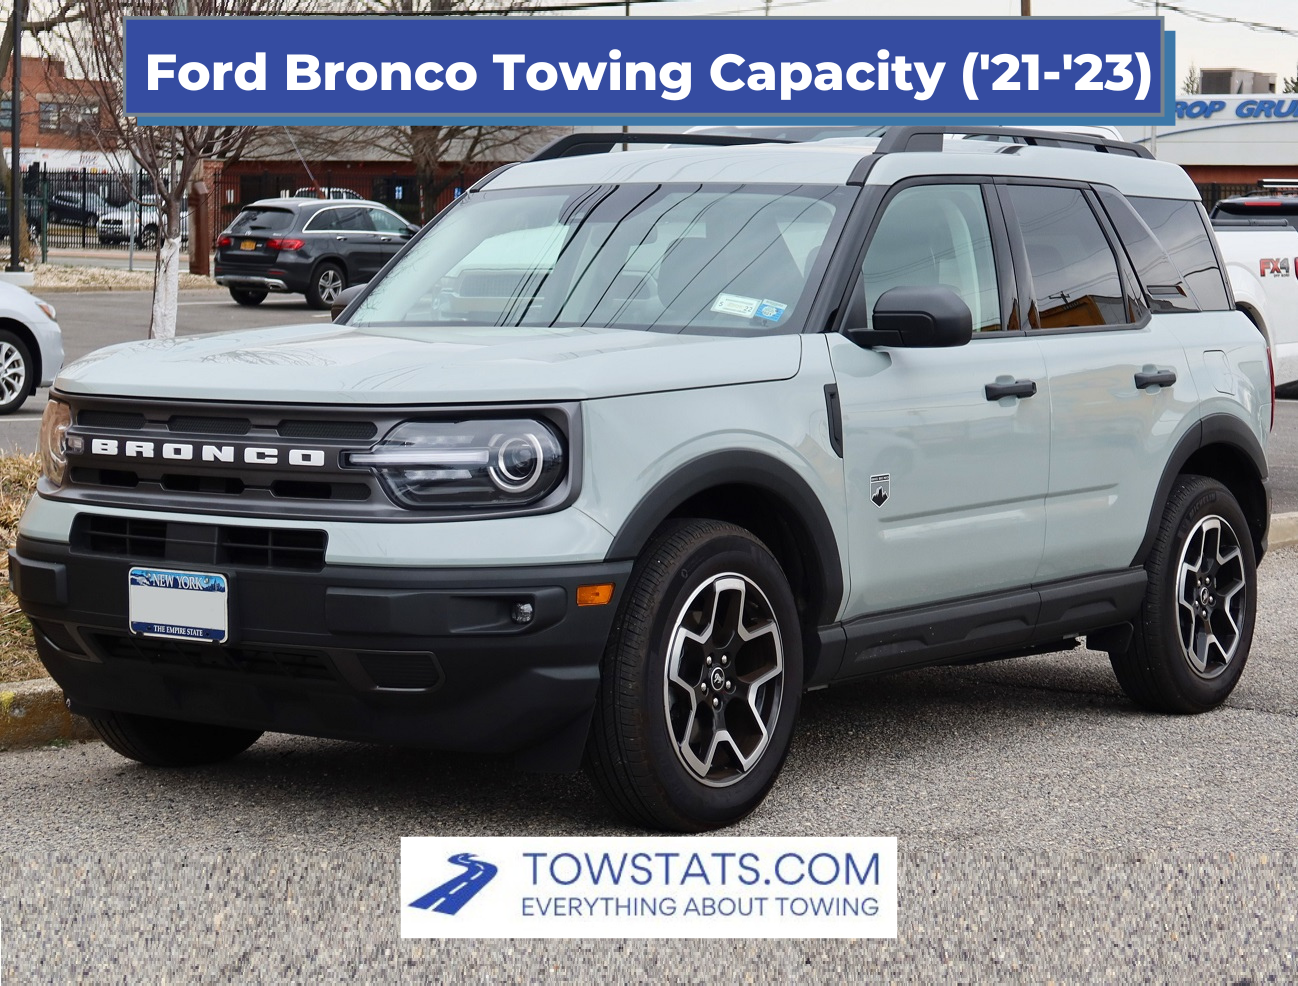 Ford Bronco Towing Capacity